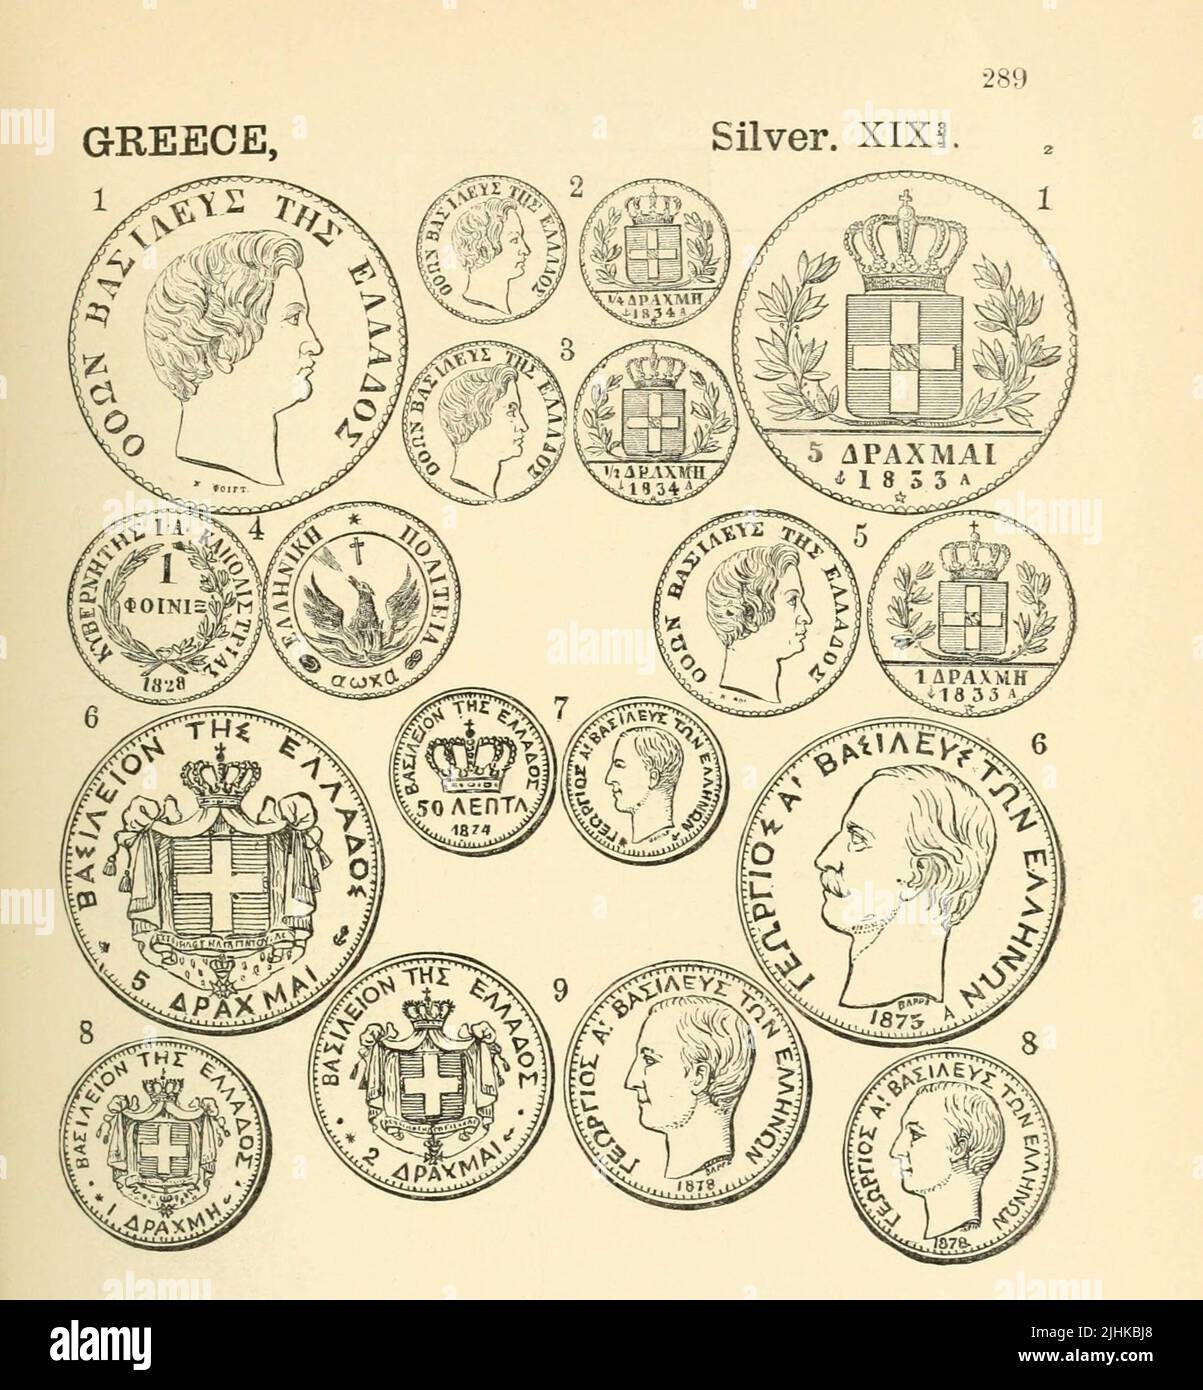 Silver Coins of Greece from the book Illustrated encyclopaedia of gold and silver coins of the world; illustrating the modern, ancient, current and curious, from A.D. 1885 back to B.C. 700 by Andrew Madsen Smith, Publication date 1886 Stock Photo